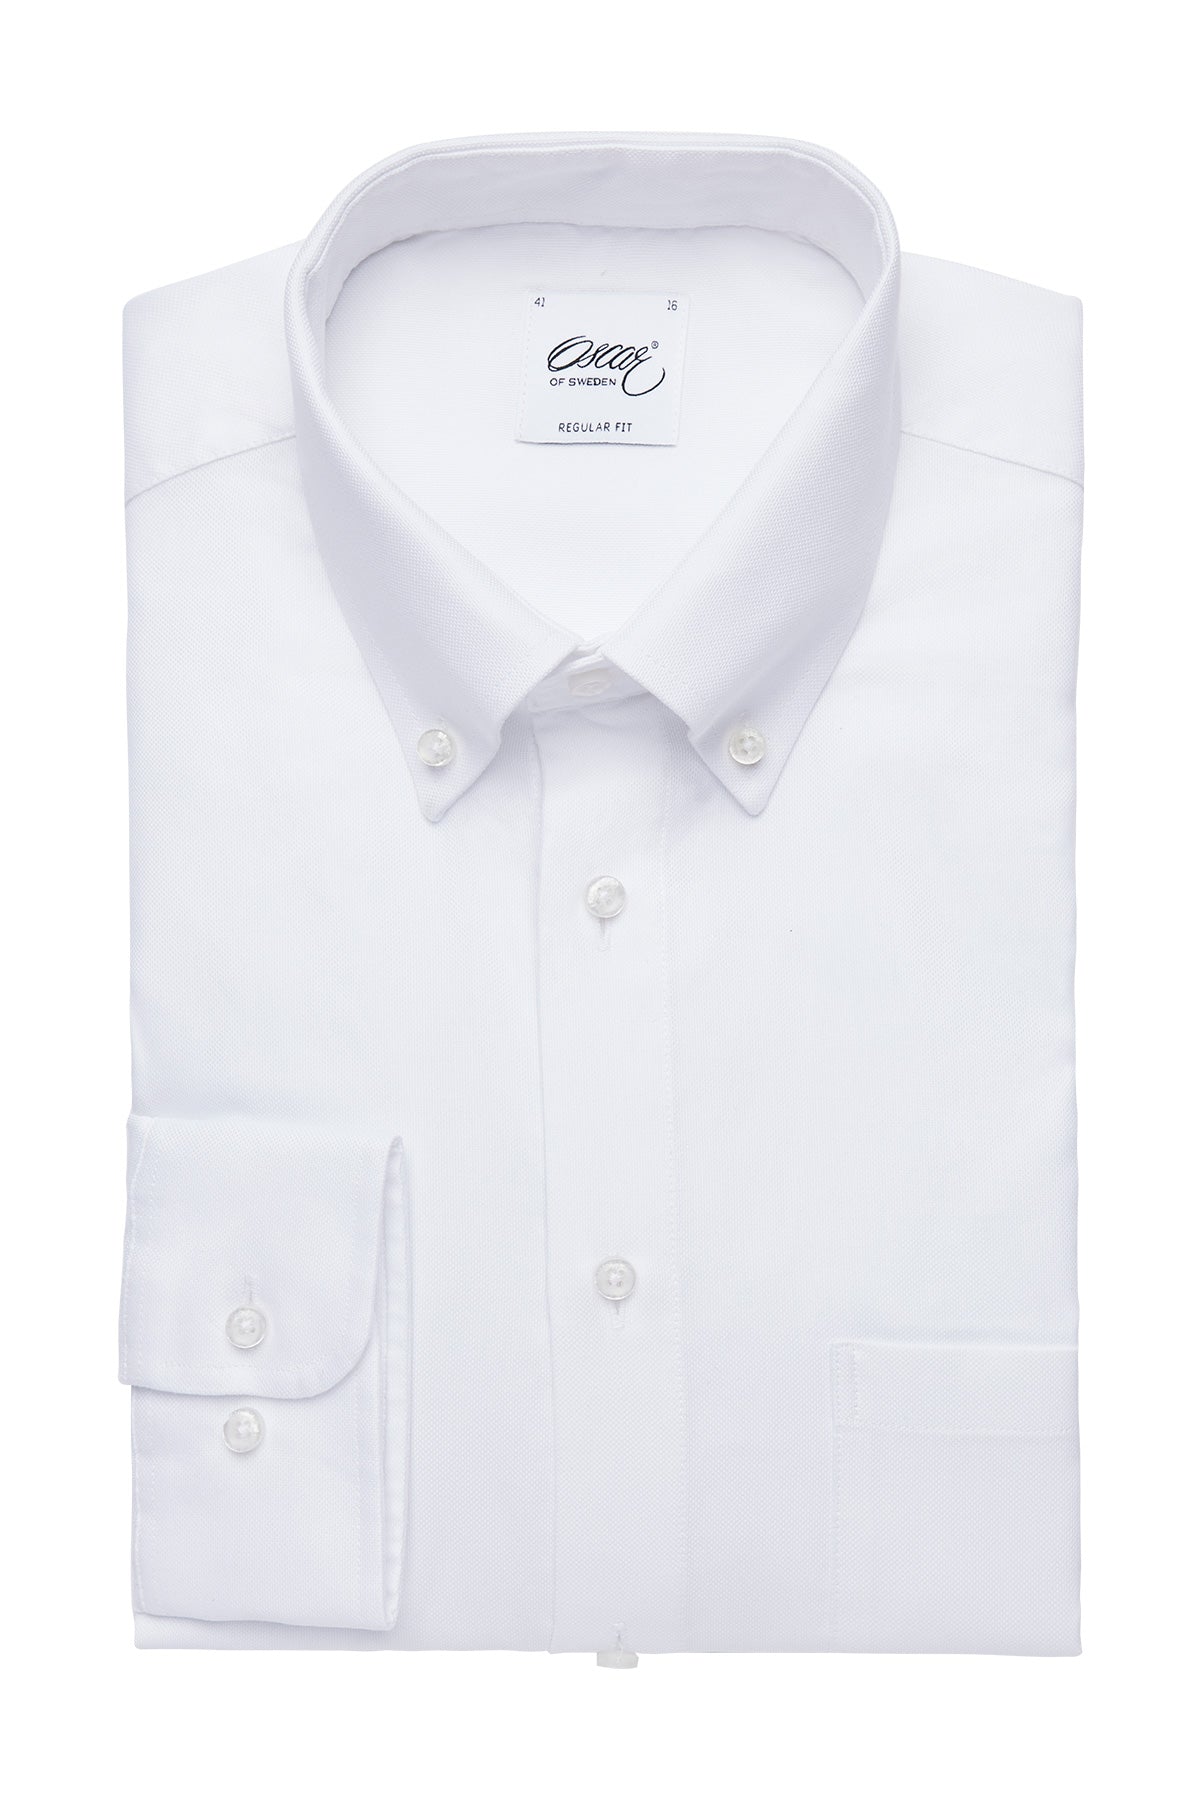 White washed button down regular fit shirt